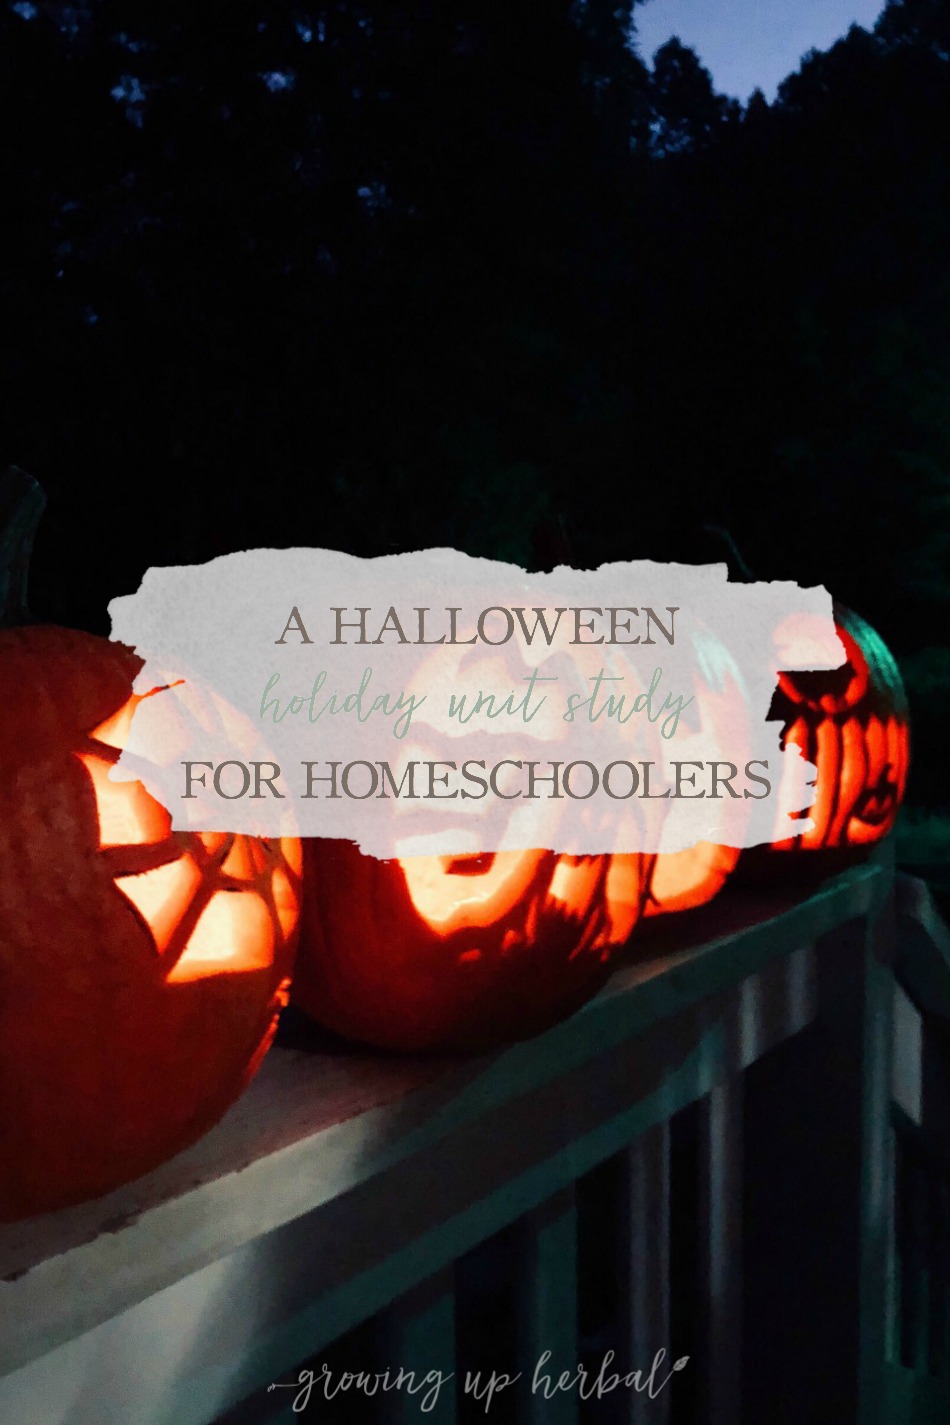 A Halloween Holiday Unit Study for Homeschoolers | Growing Up Herbal | We’re trying something new in our homeschool. We’re doing a holiday-themed unit study during our Winter Break all about Halloween. Here’s what it consists of in case you want to do one too!